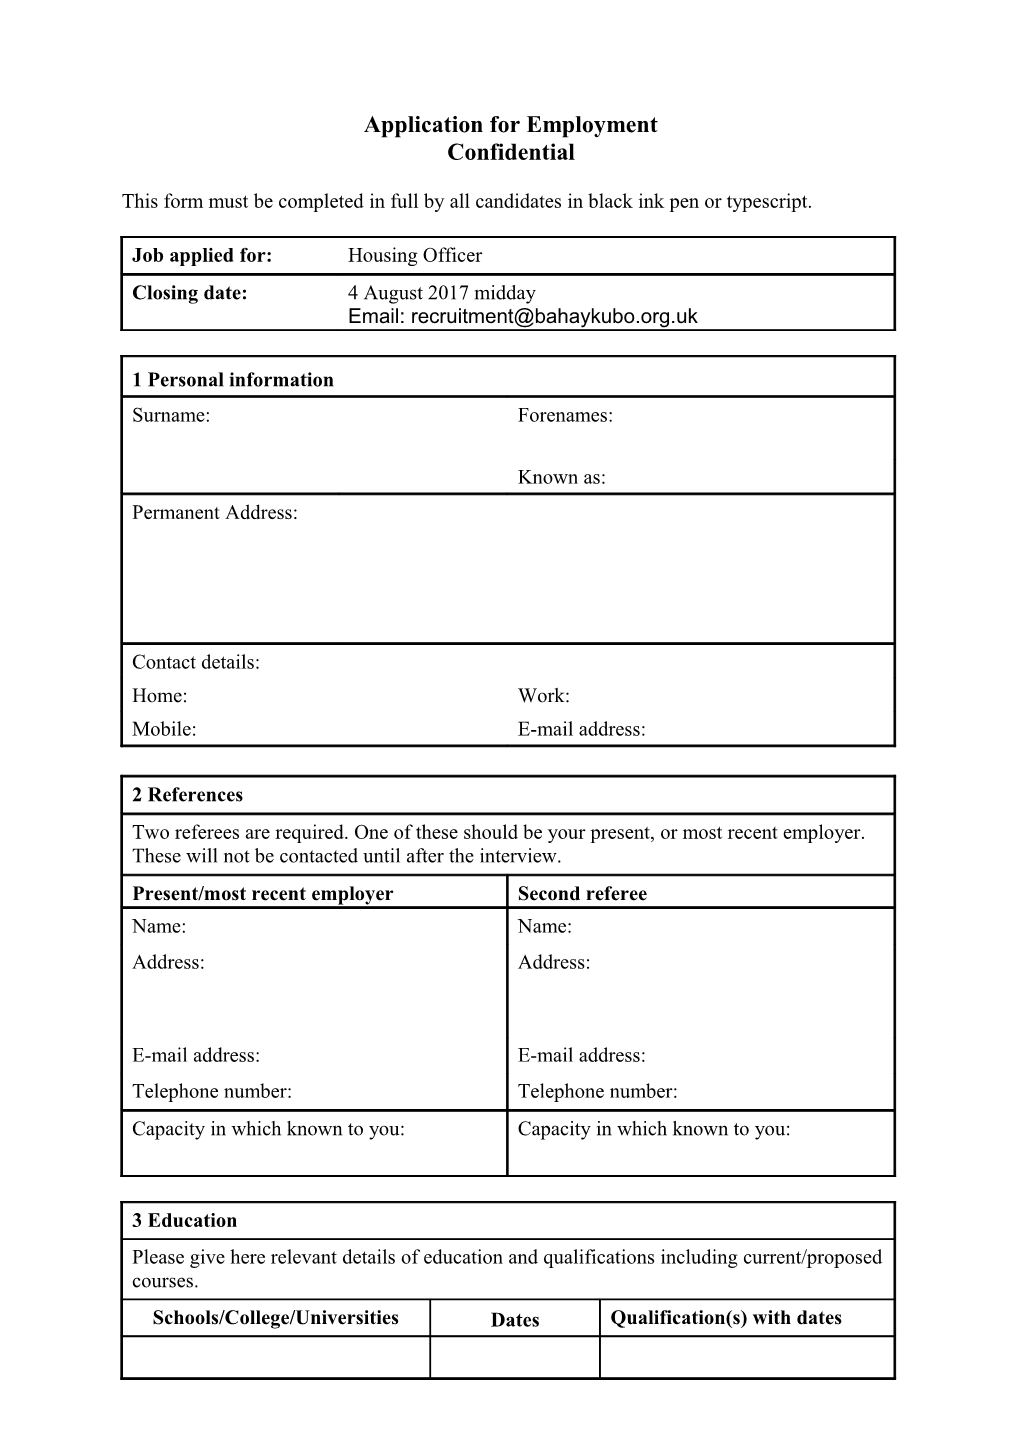 Application for Employment s118